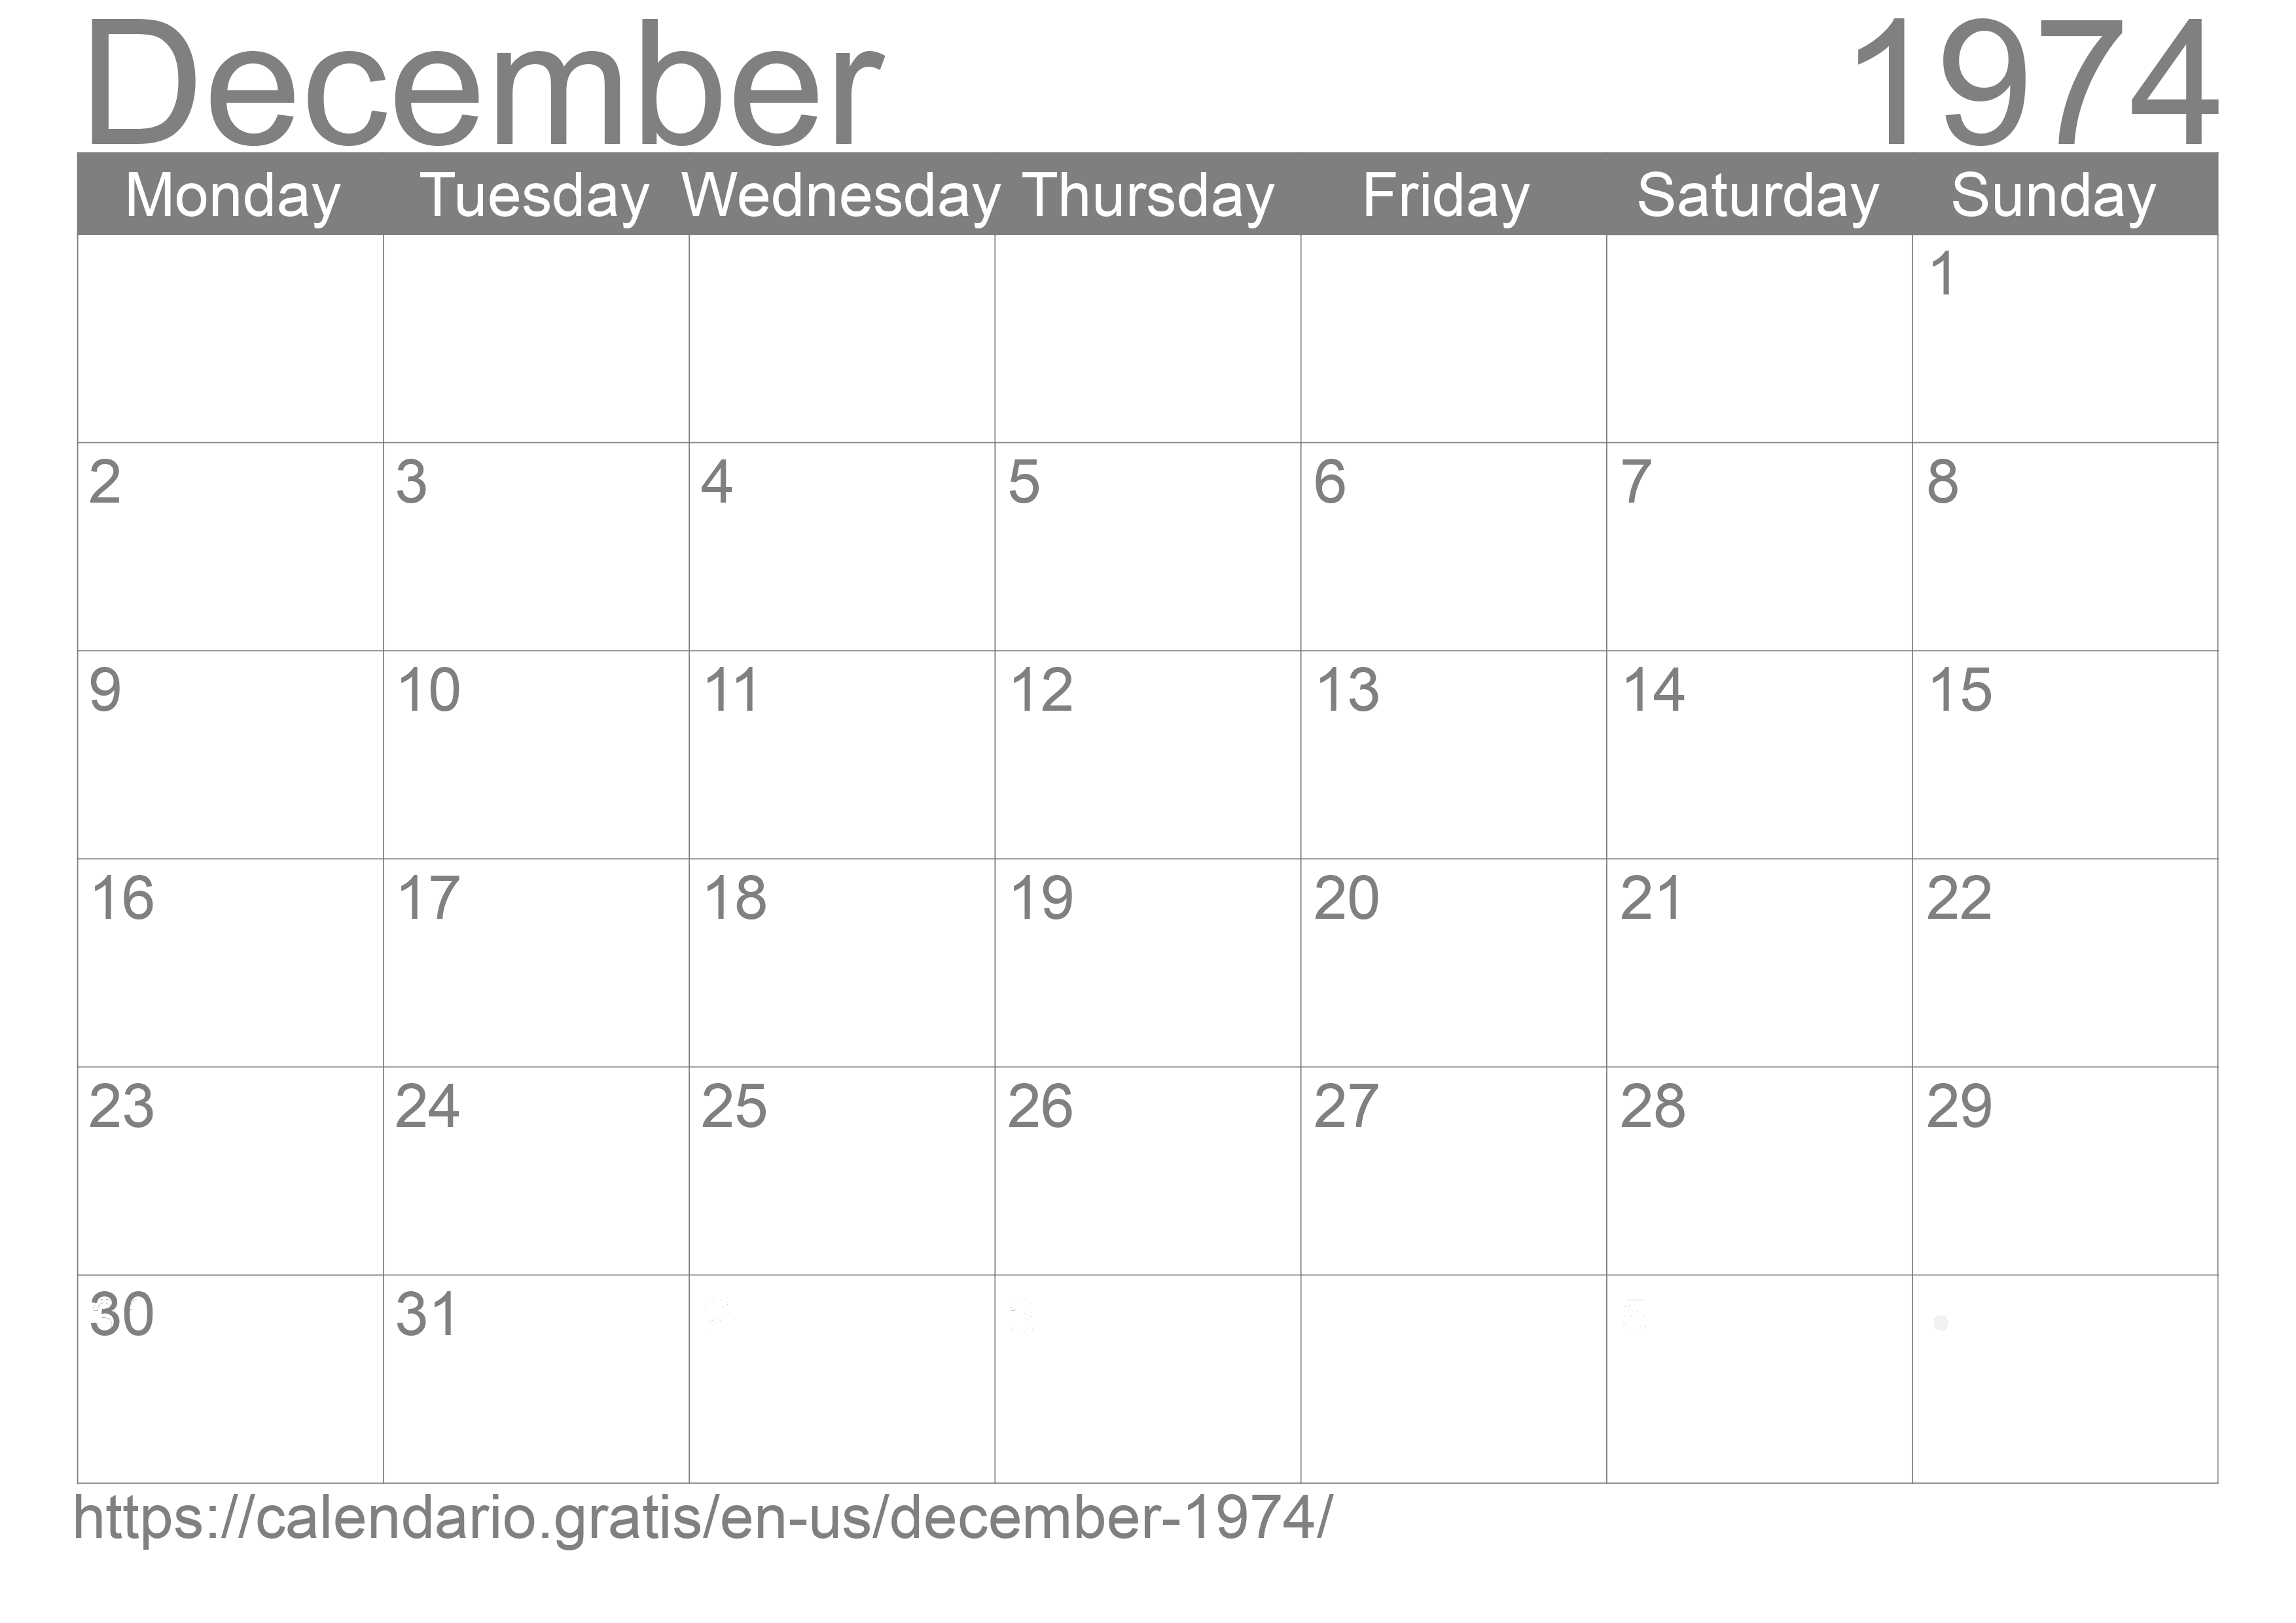 Calendar December 1974 from United States of America in English ☑️